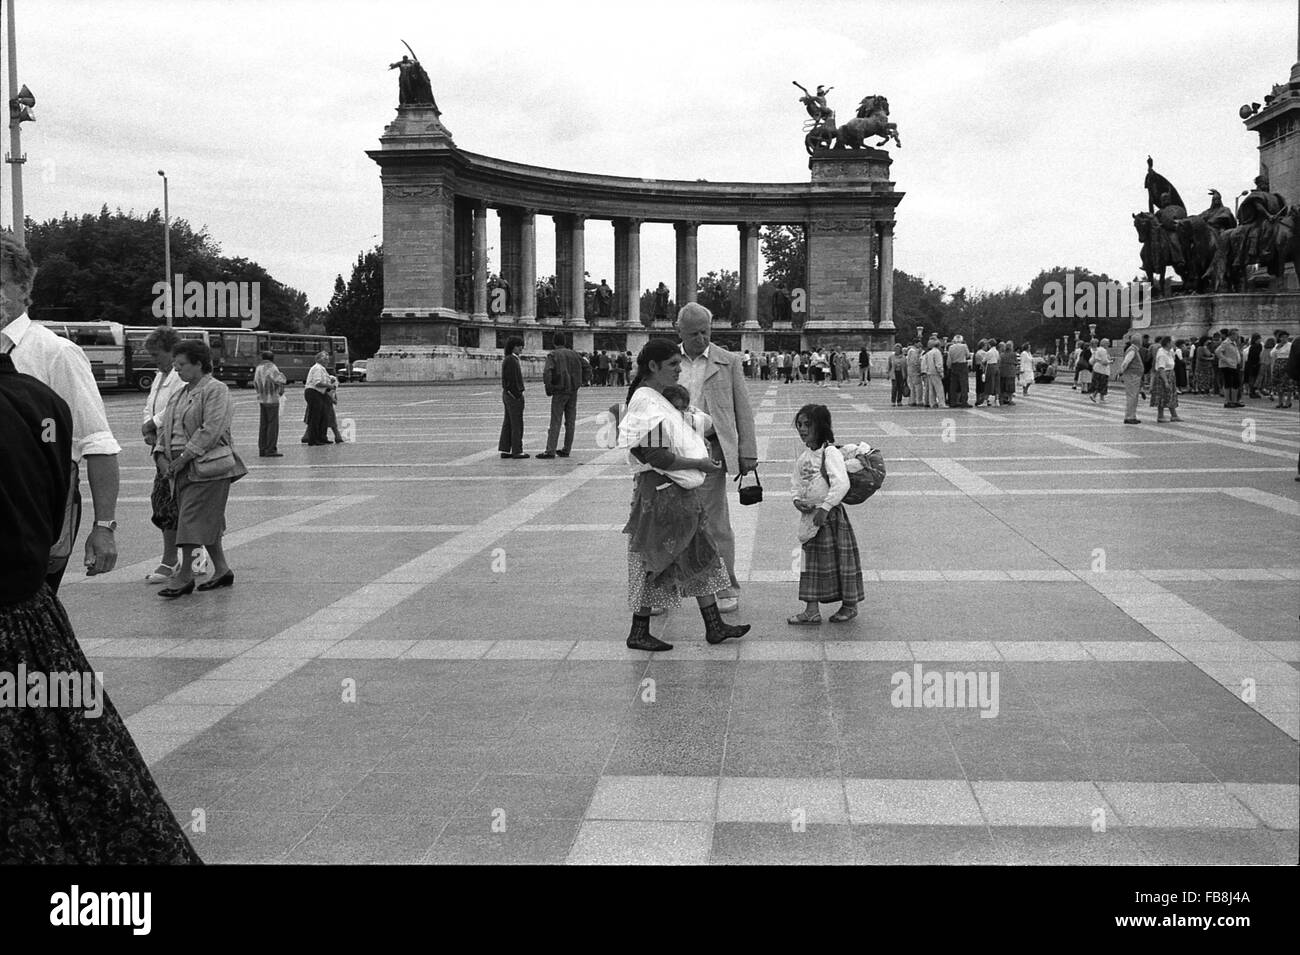 Glance on Bupapest at the time of the Nineties. -  1990  -  Hungary / Budapest  -  Glance on Bupapest at the time of the Nineties. -  Tourists and Hungarian inhabitants walking on the famous and huge square called 'Hosok Tere' ('Heroes' Square'). - We can observe one of the two peristyles of the 'Millenium Monument' and the entrance of the Musueum of Fine Arts at the right.   -  Philippe Gras / Le Pictorium Stock Photo